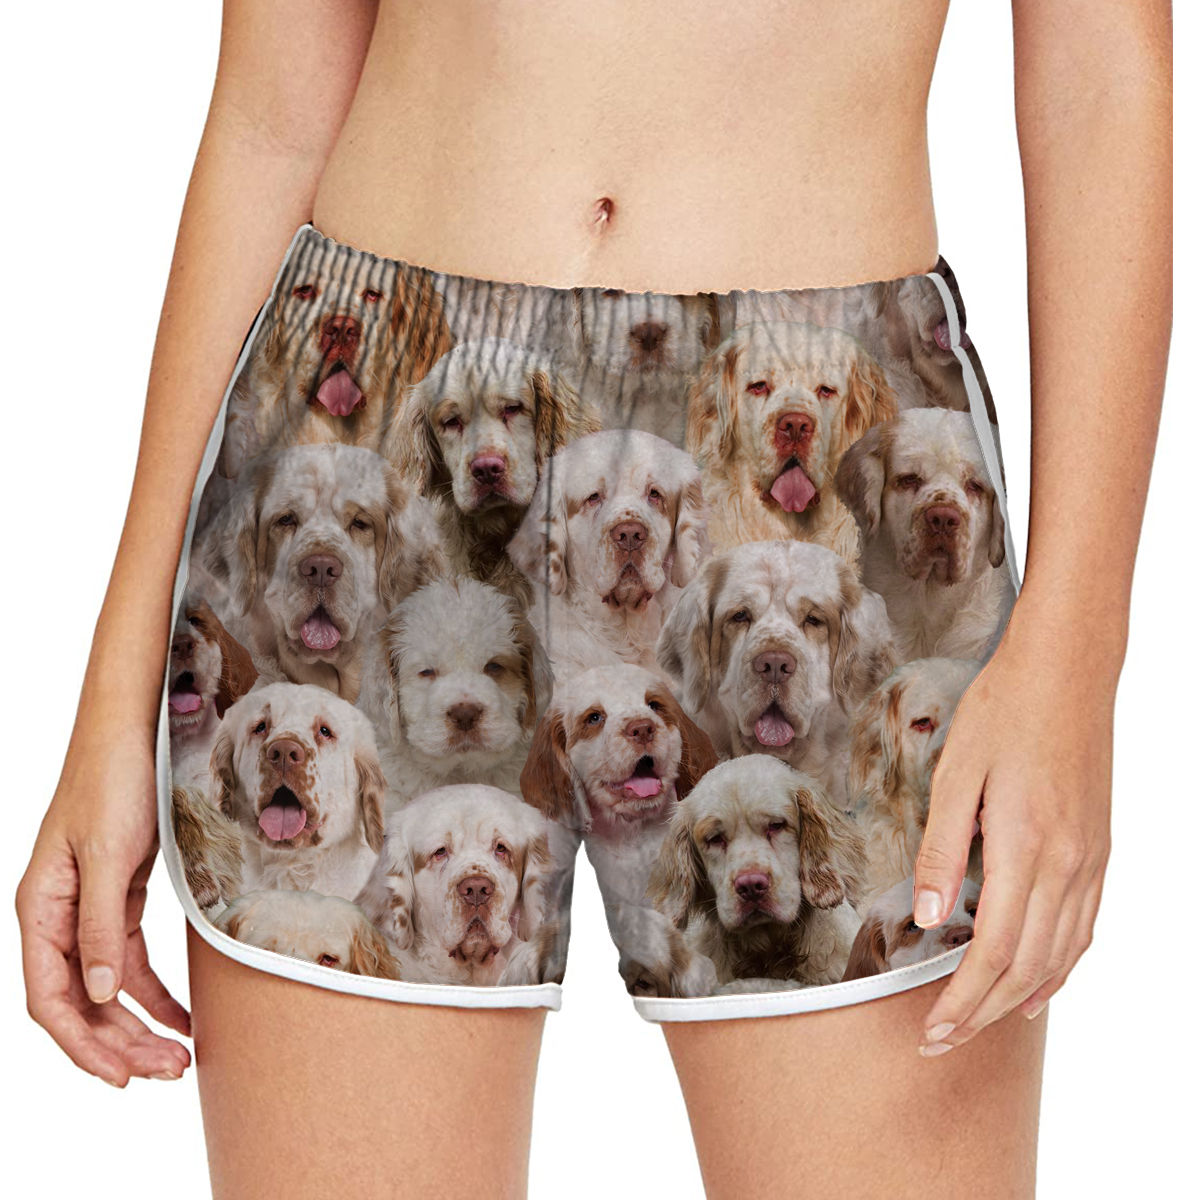 You Will Have A Bunch Of Clumber Spaniels - Women's Running Shorts V1